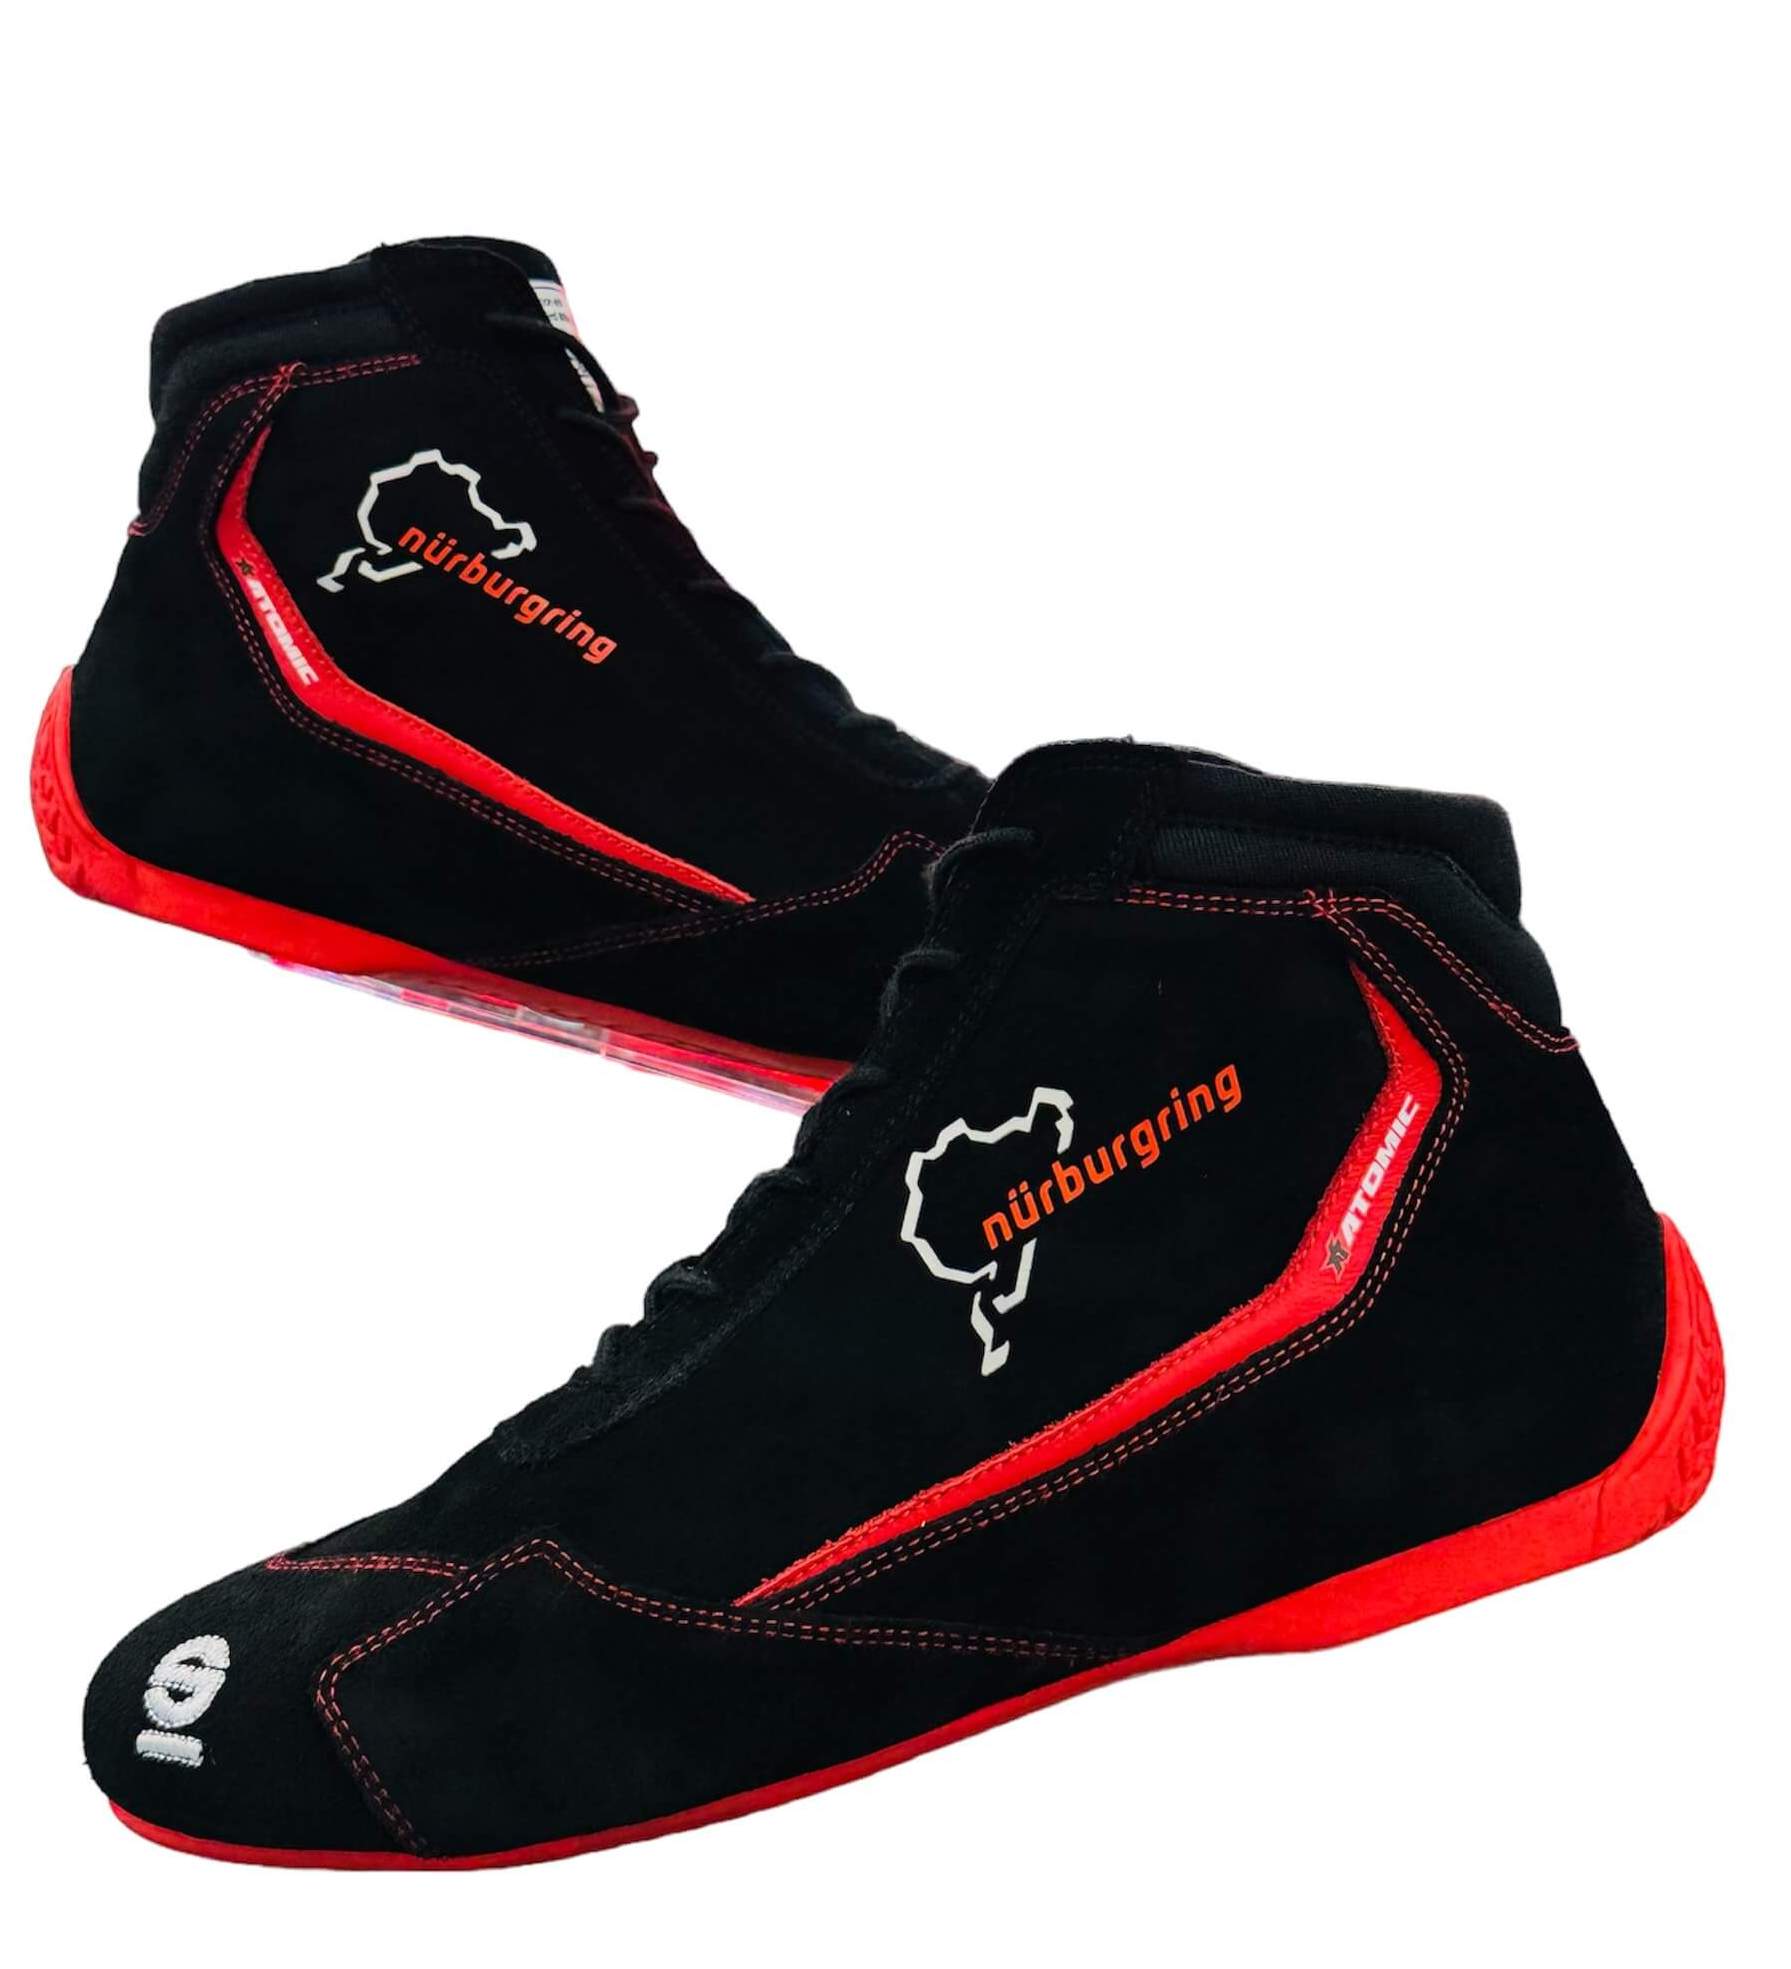 SPARCO 001295SP_NBR45 Shoes Slalom Nurburgring Edition black/red Size 45 Photo-3 